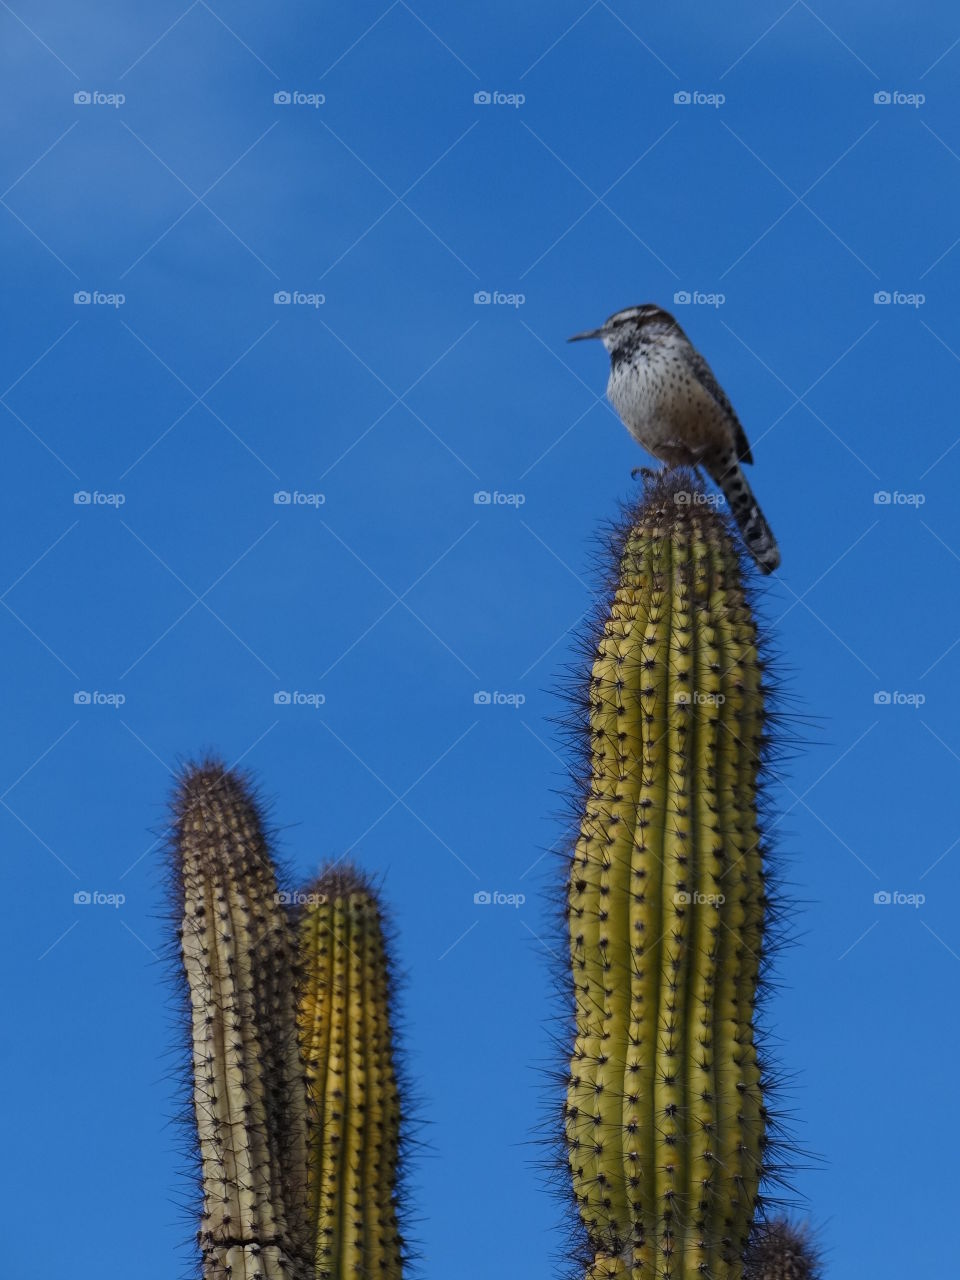 Cactus wren on top of  Saguaro. Was in Saguaro National Park and heard chirping up above, looked up to see this little when atop a giant saguaro cactus.